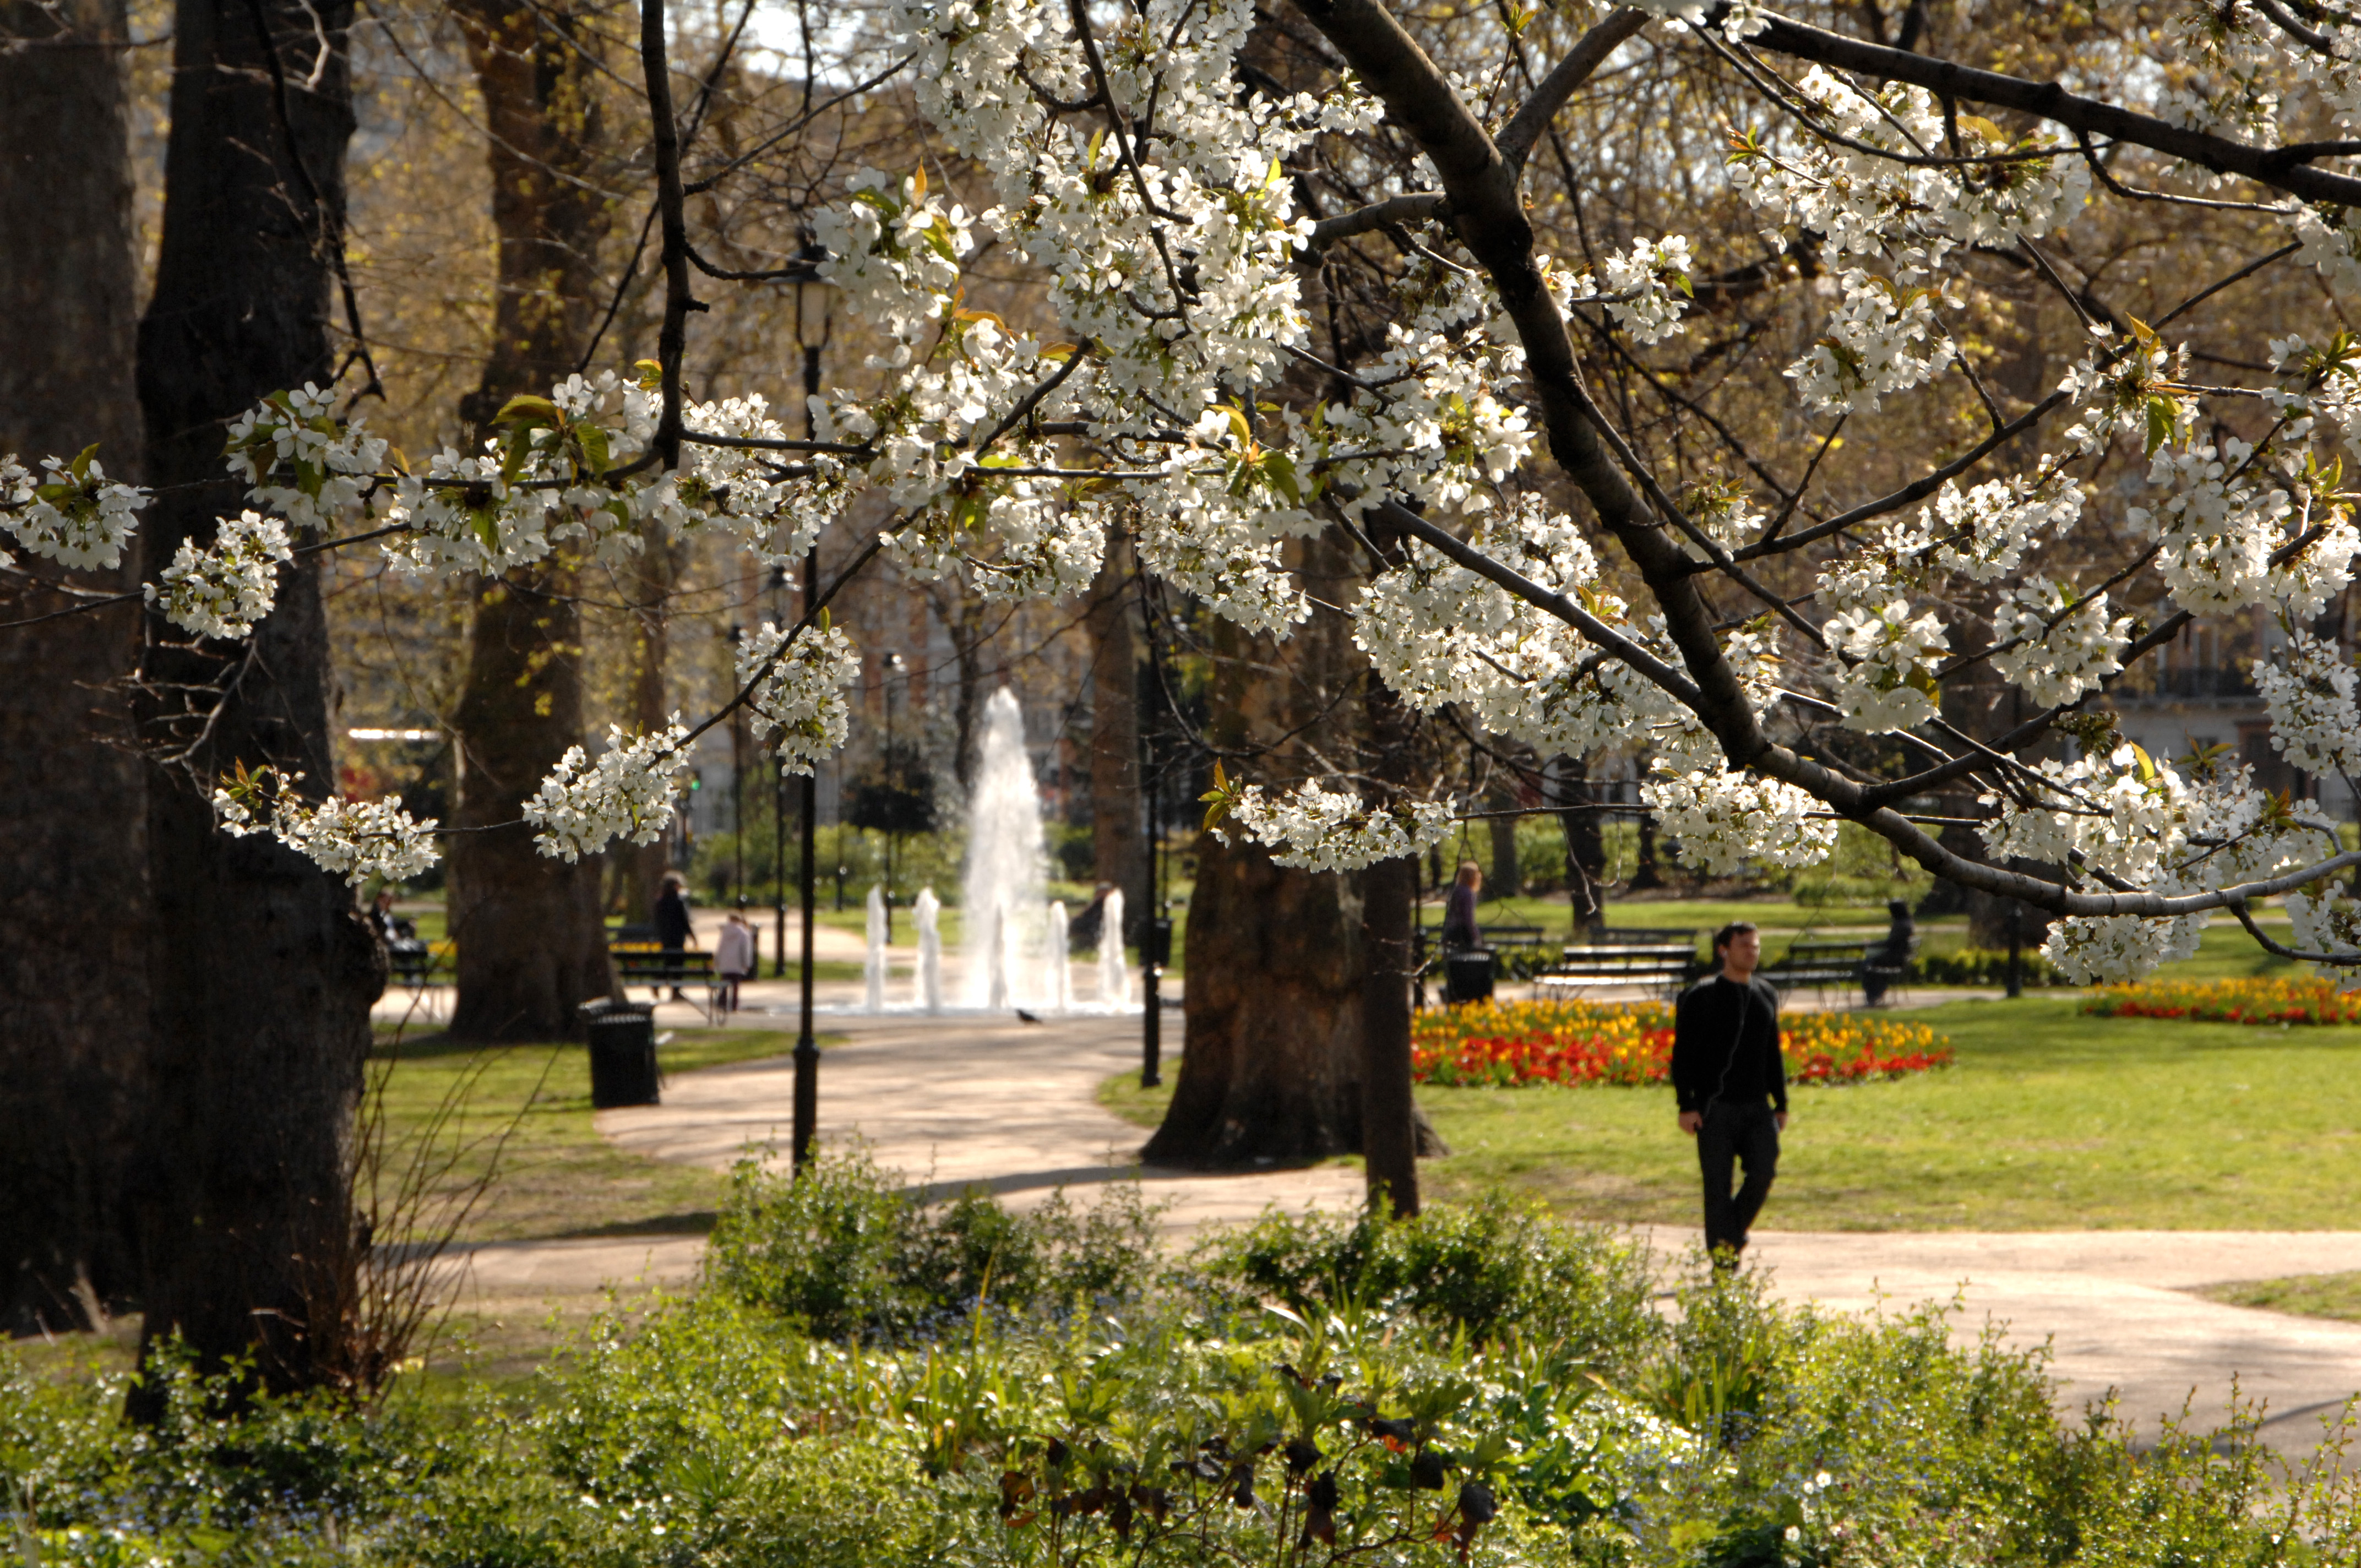 Russell Square in spring is an ideal place to relax